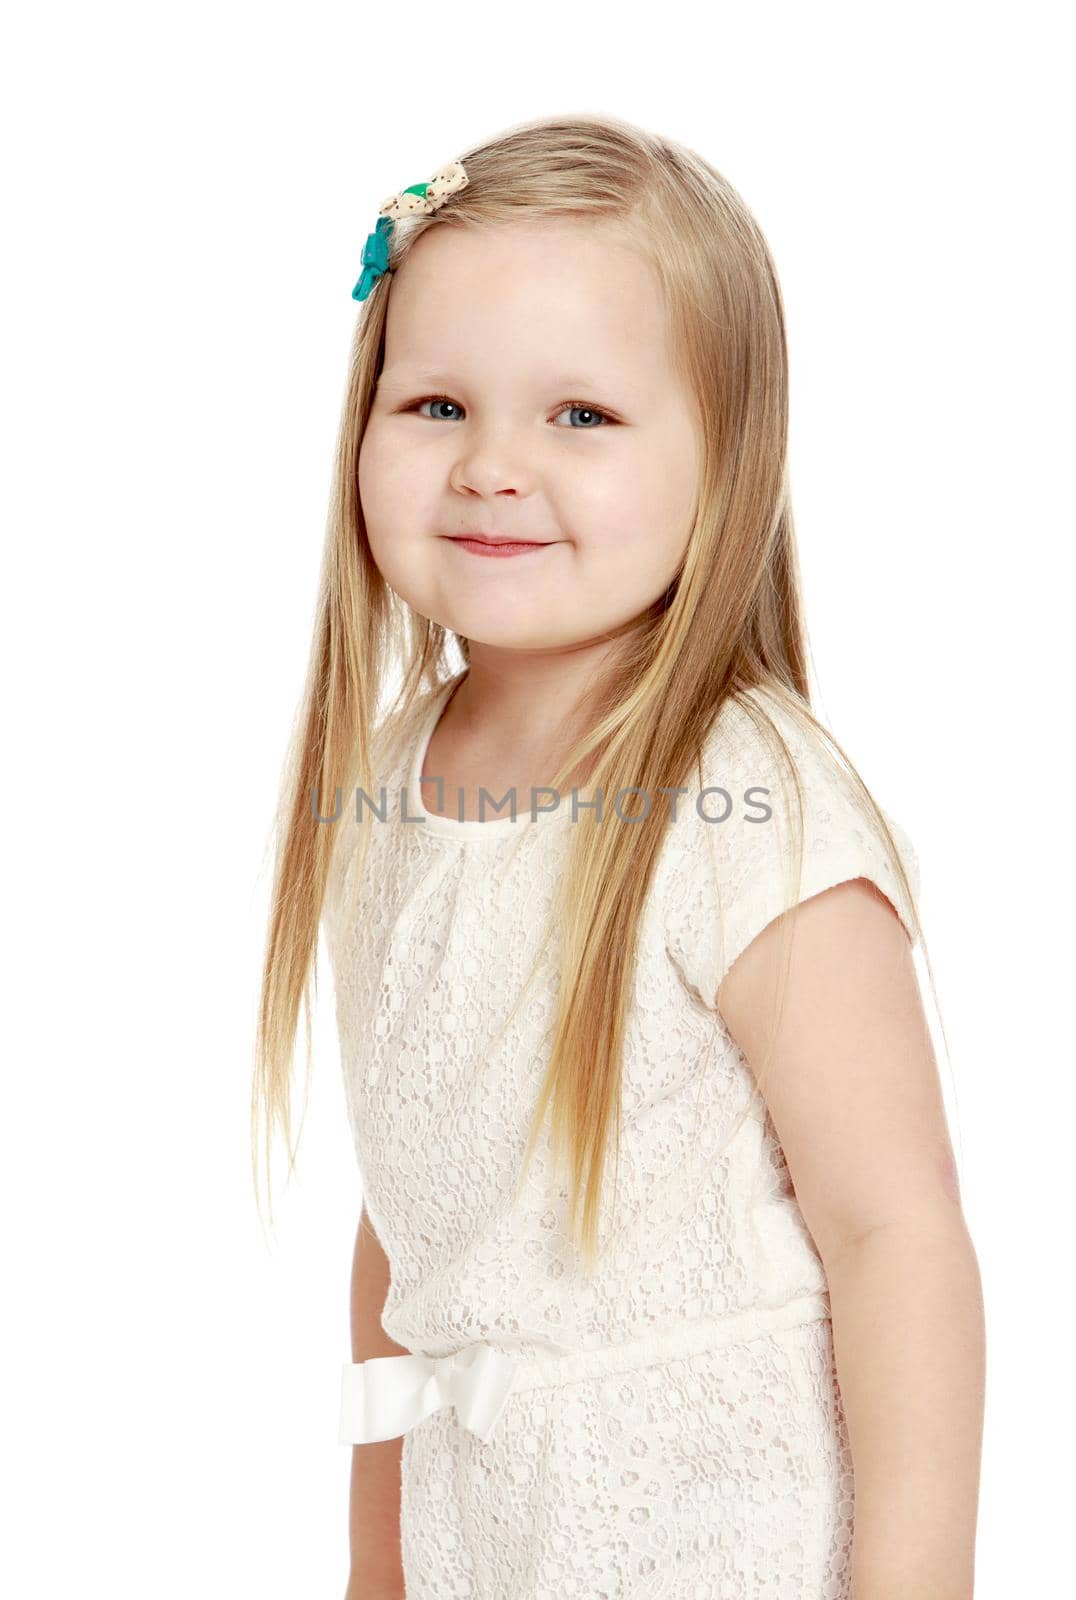 Close-up .Adorable little round-faced girl with long, blonde hair below the shoulders, little Princess - Isolated on white background